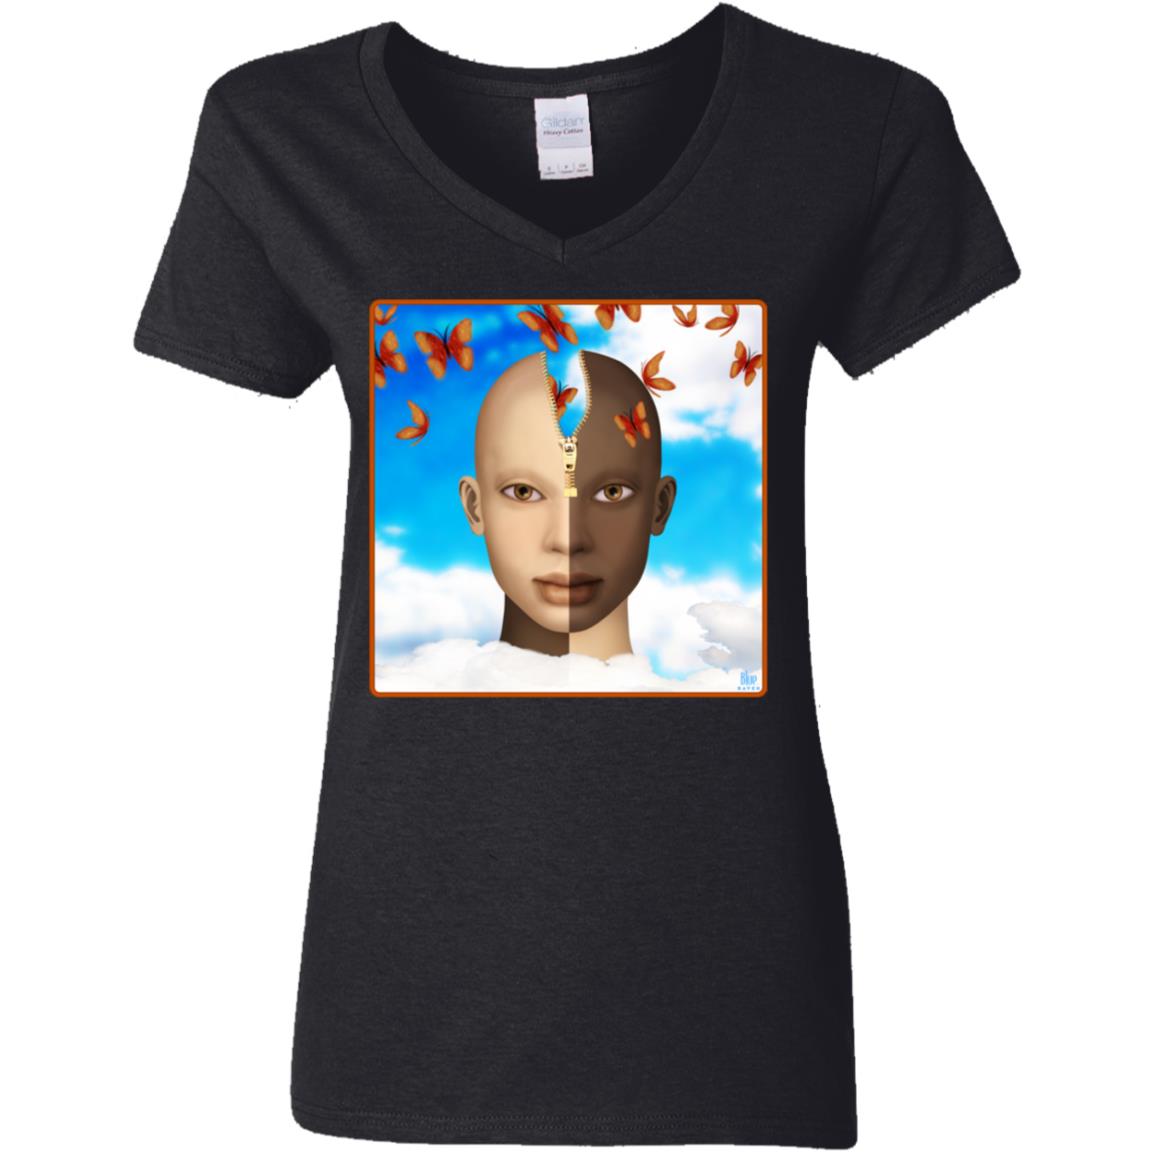 Color Of Our Thoughts - Women's V-Neck T Shirt